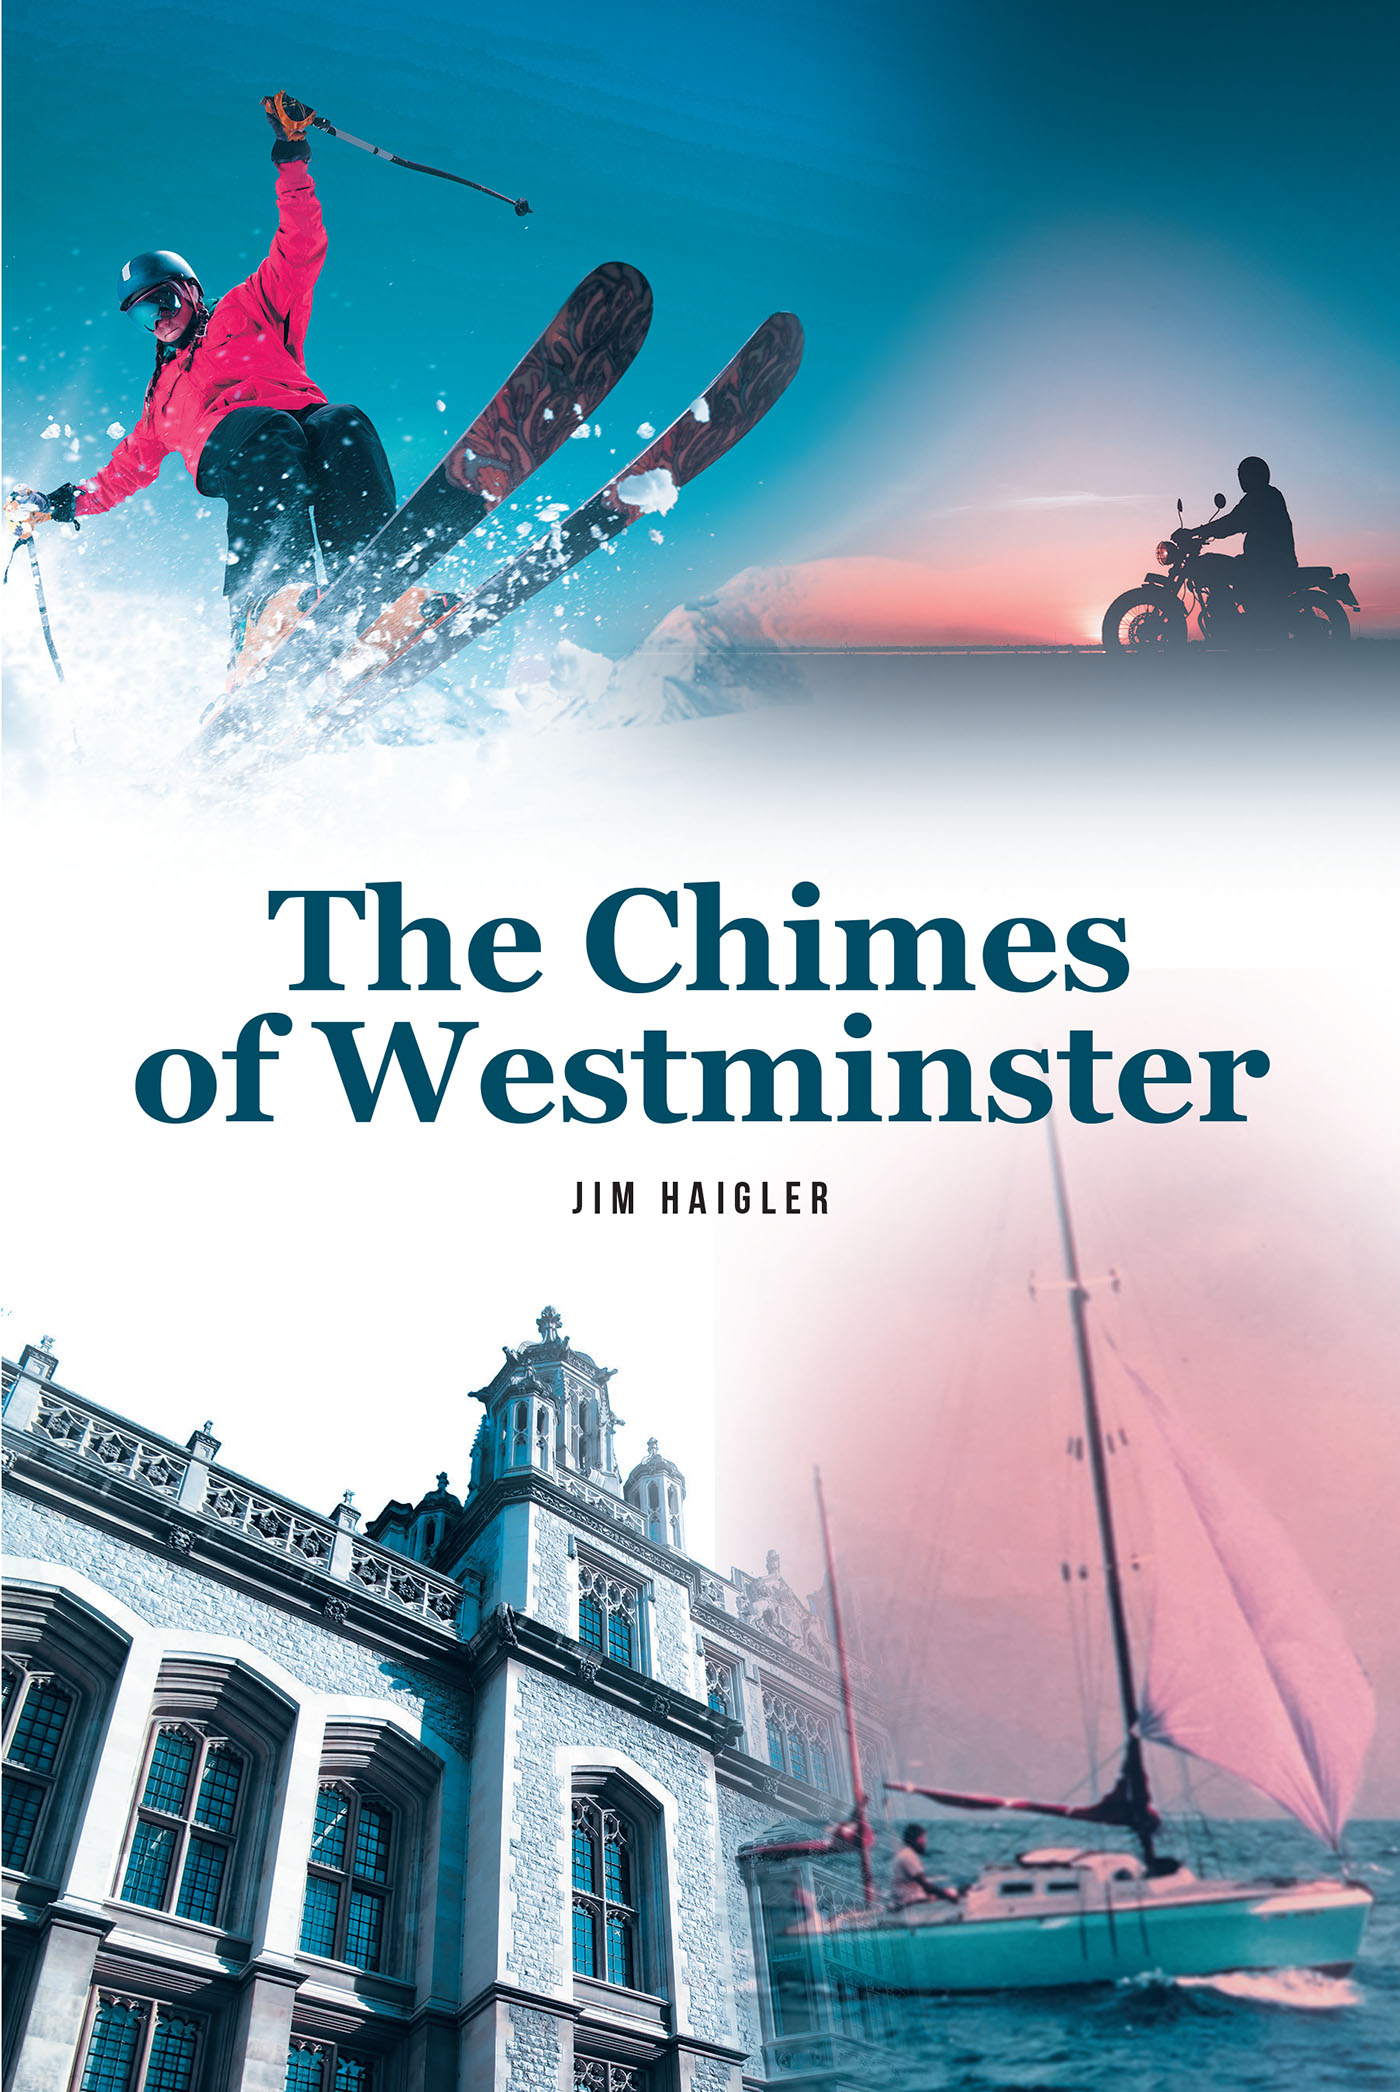 Jim Haigler’s New Book, “The Chimes of Westminster,” is the Fascinating Tale That Follows the Author on His Travels to Witness & Experience All That America Has to Offer